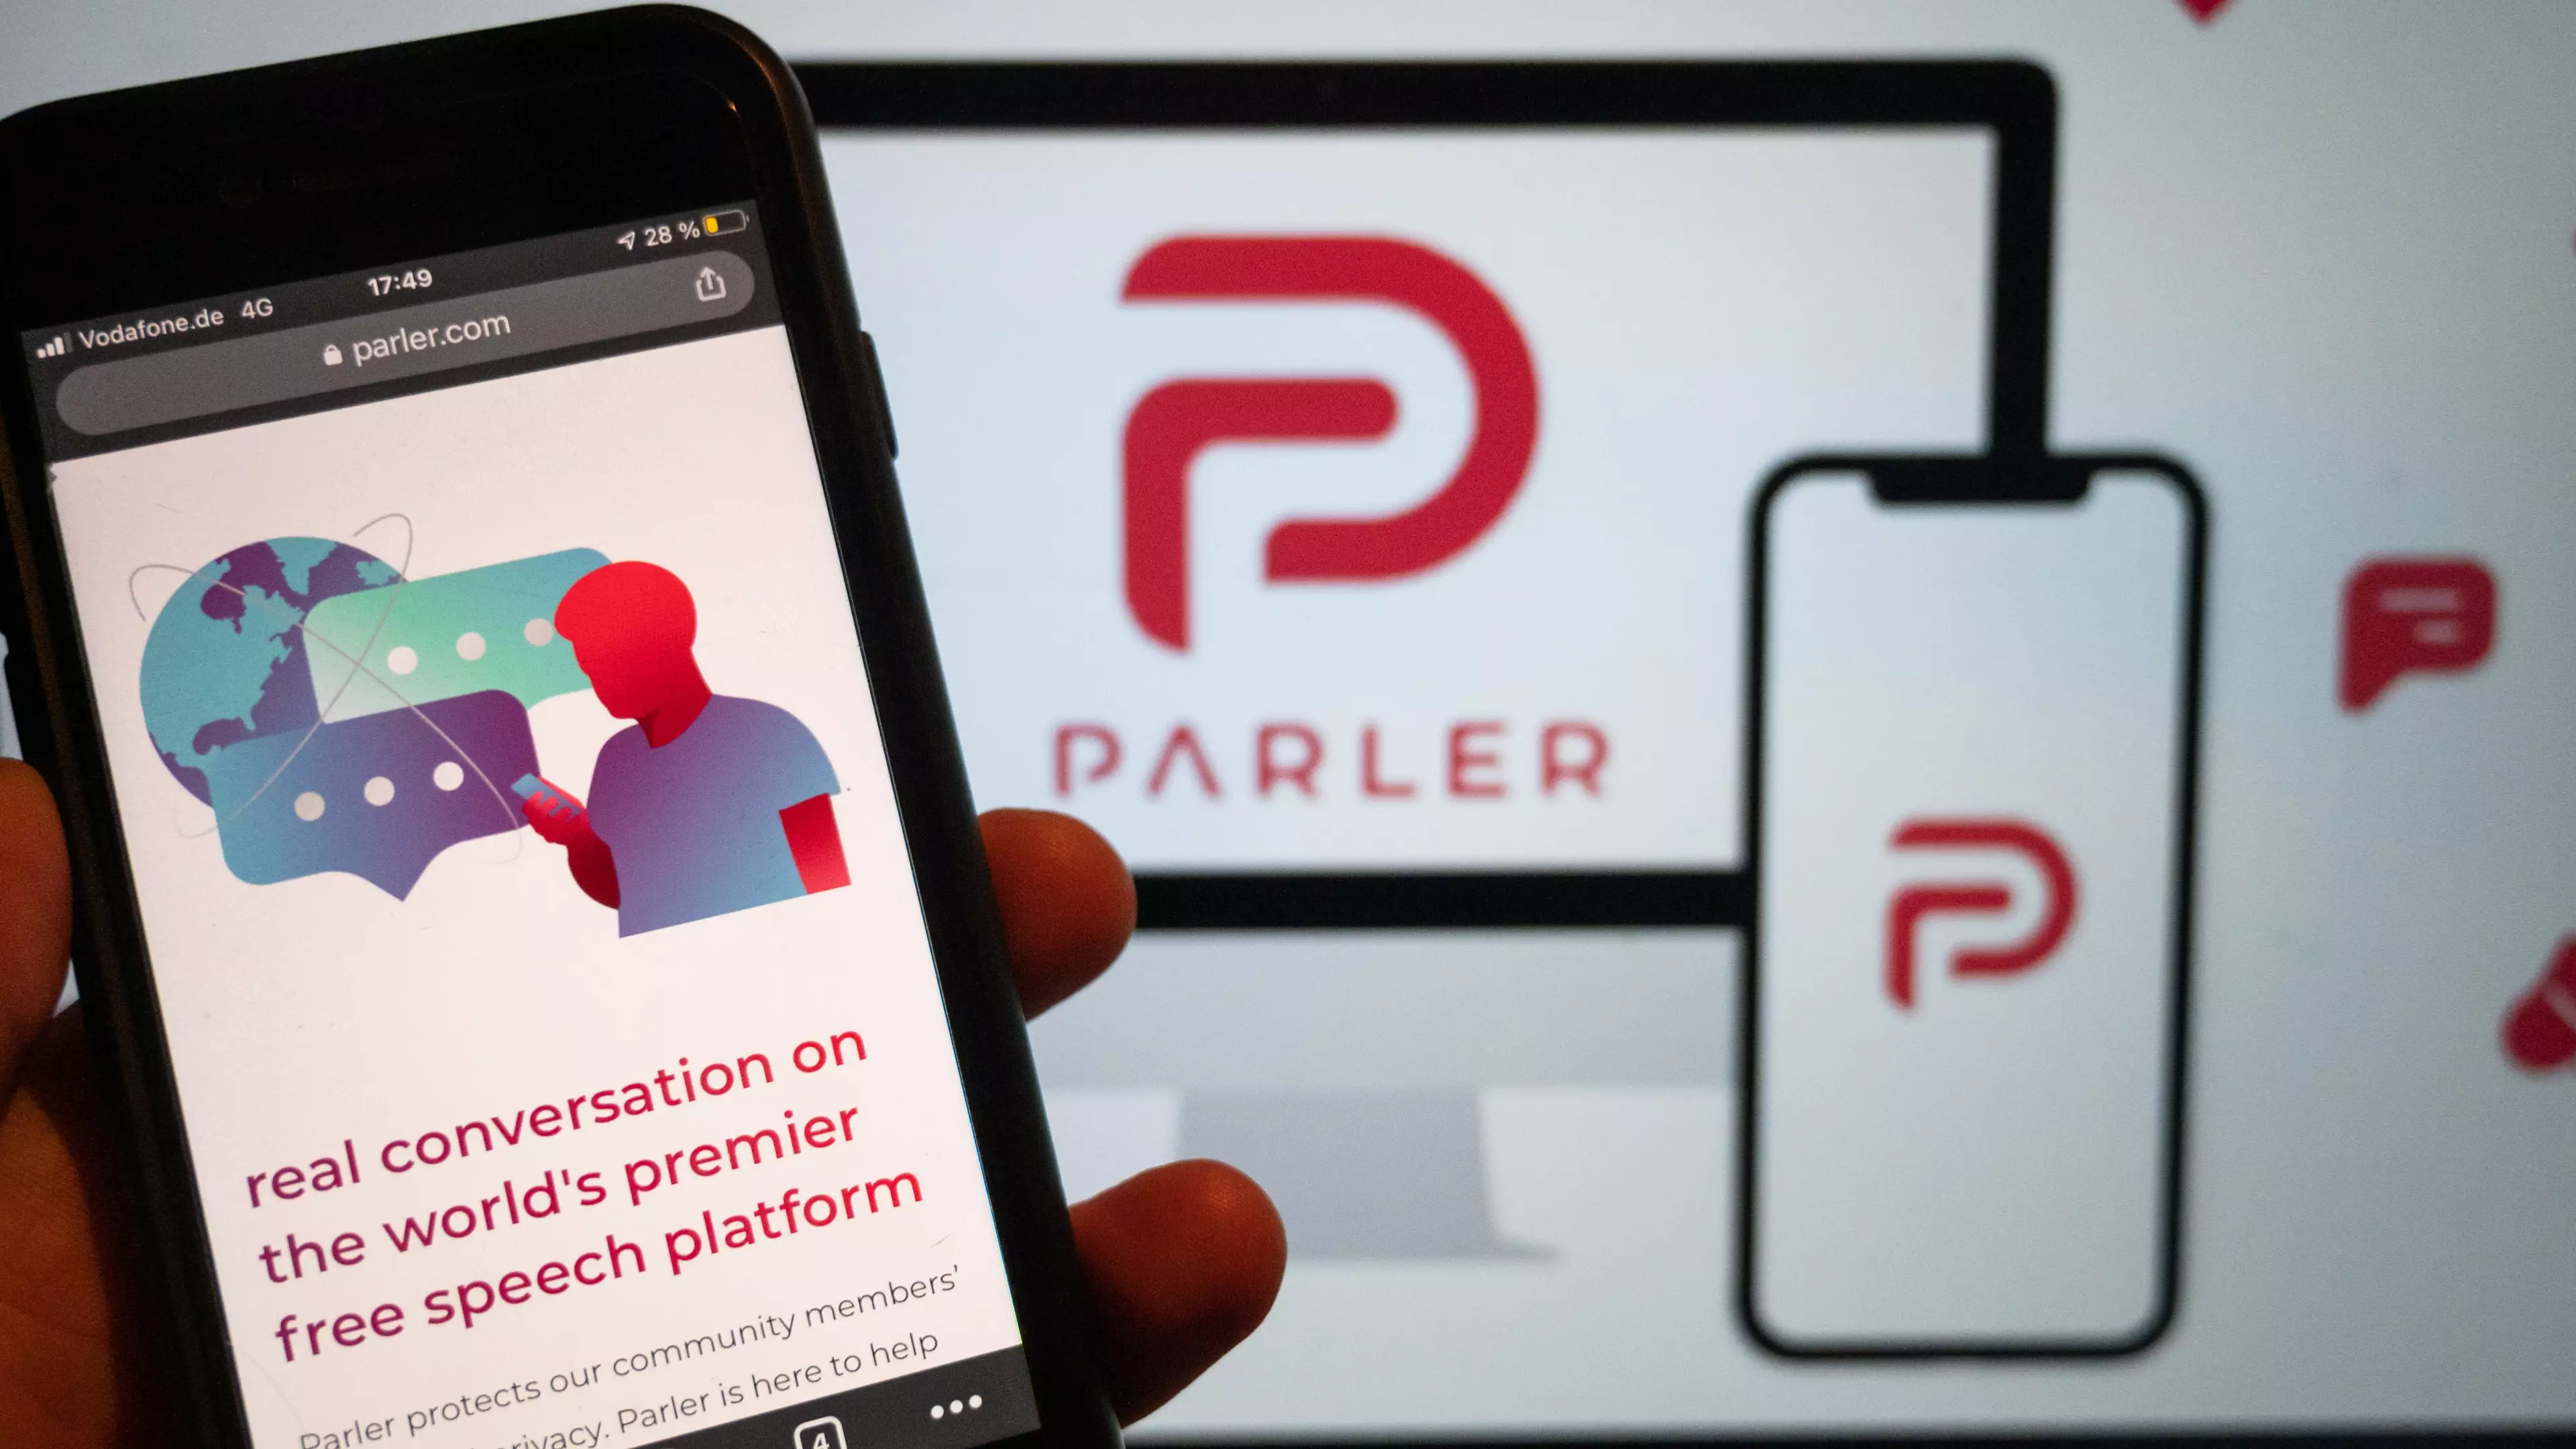 CEO Of 'Free Speech' Social Media App Parler Says Business Could Collapse